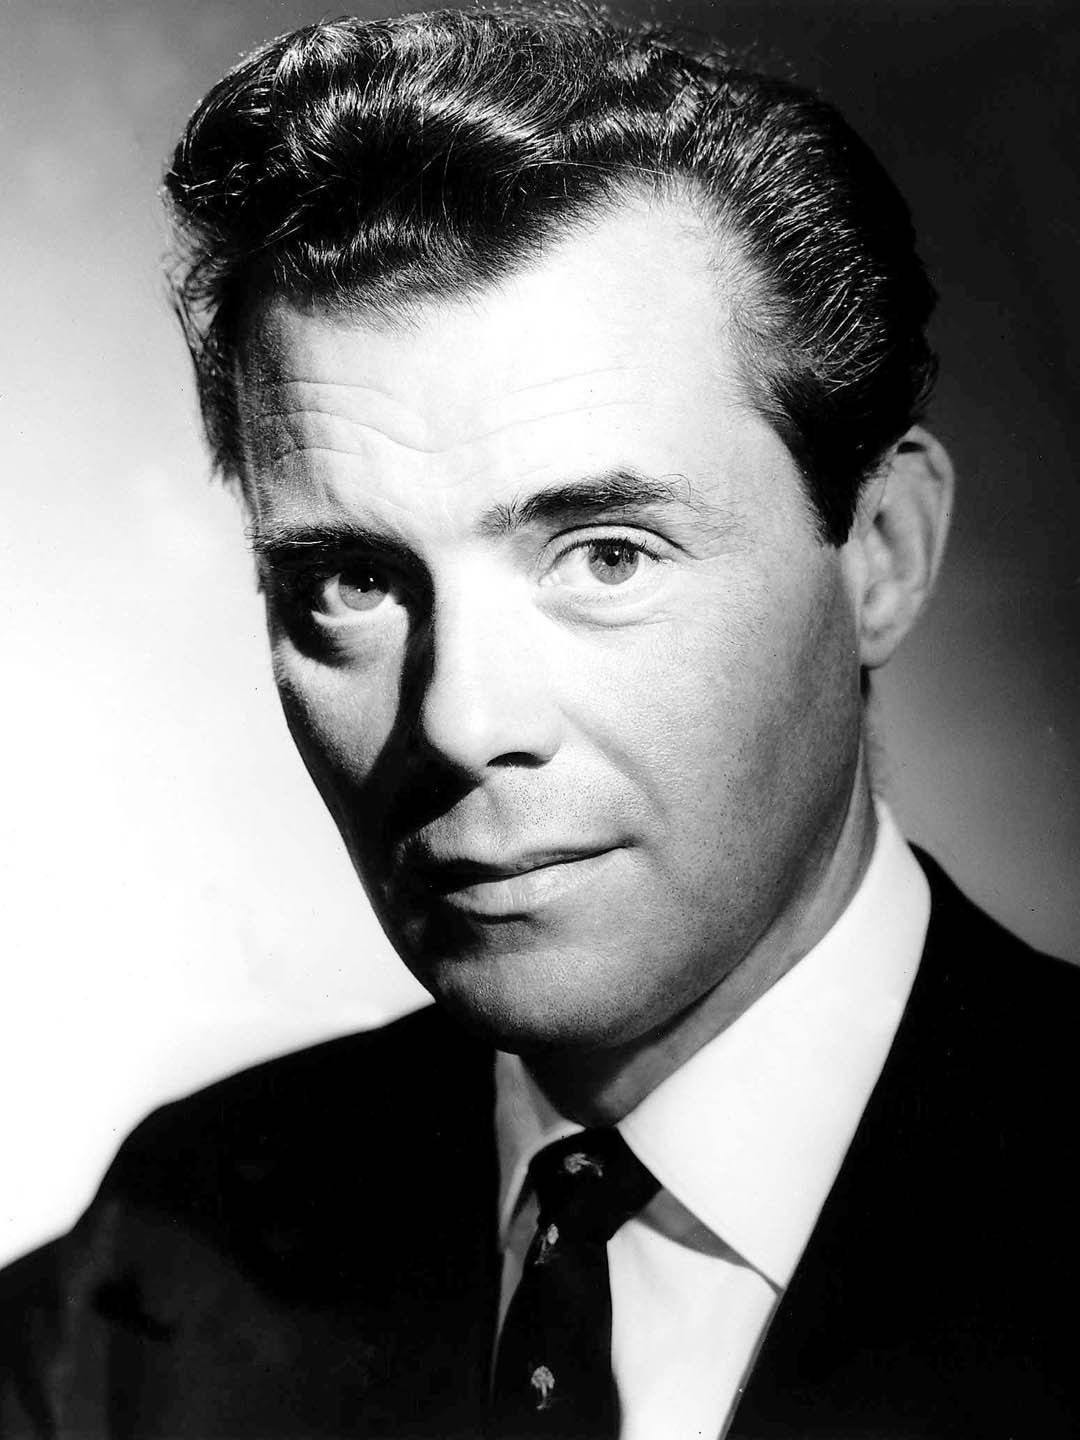 How tall is Dirk Bogarde?